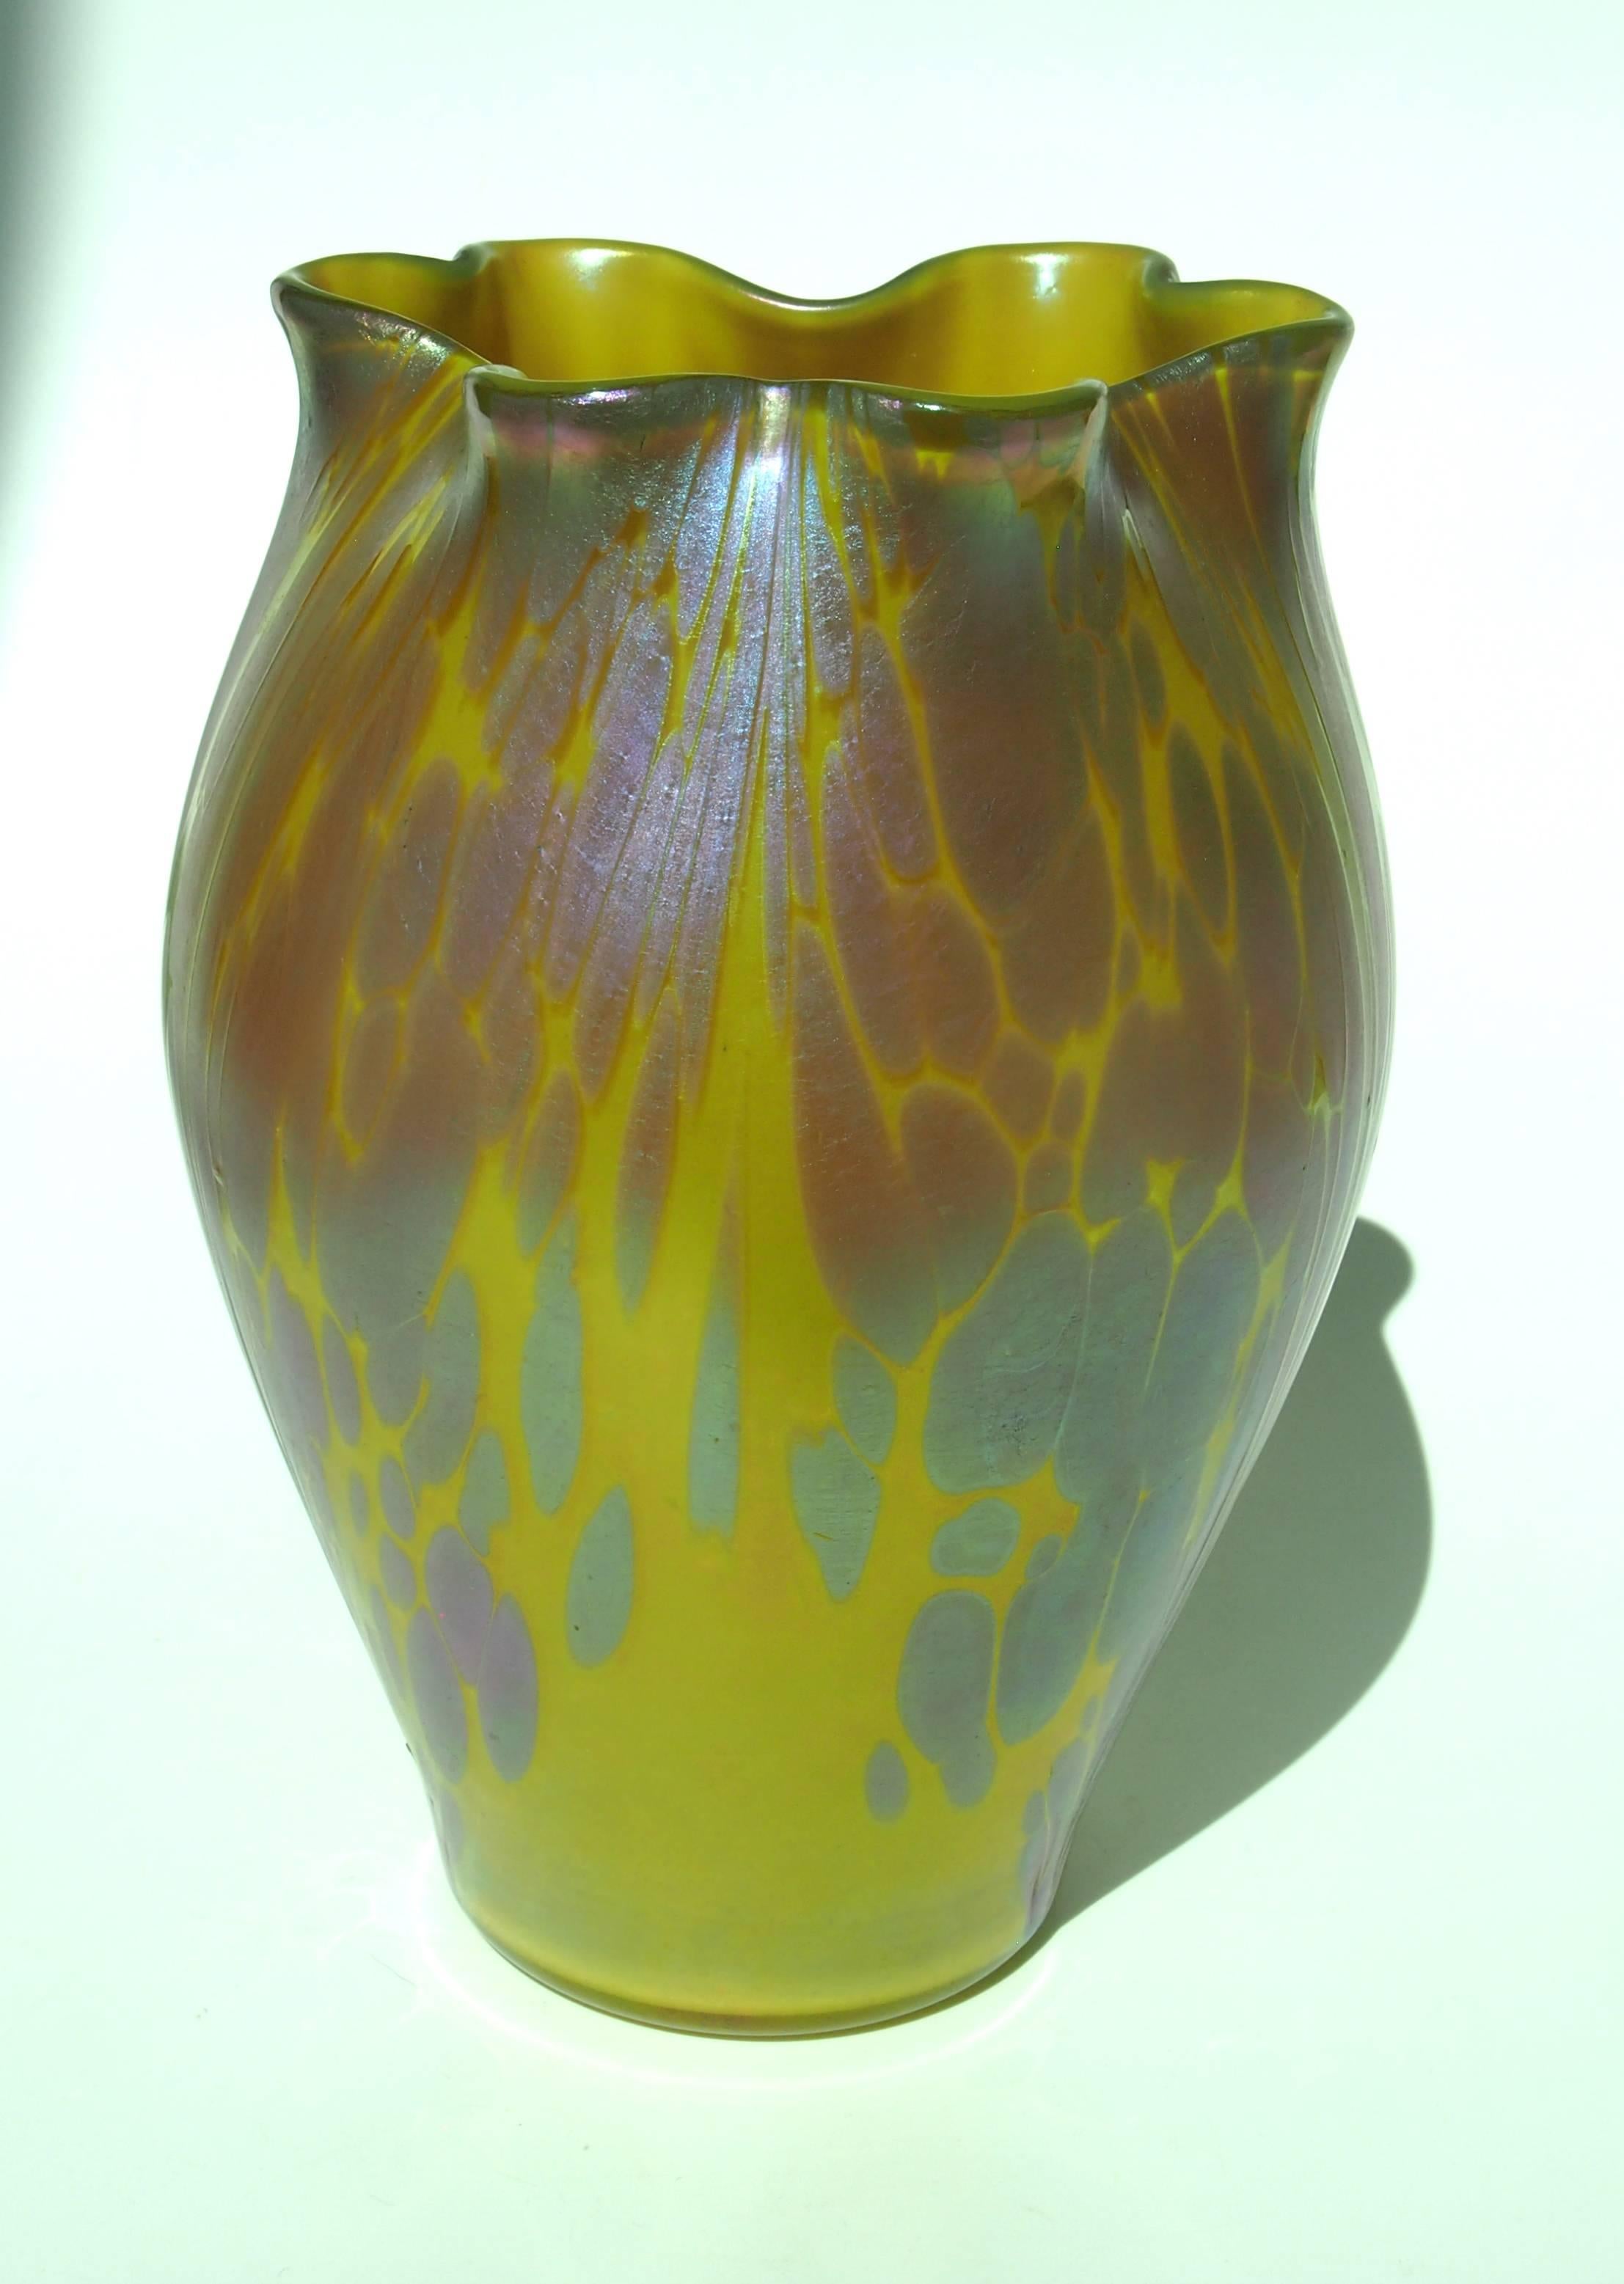 Dramatic medium large Art Nouveau/Jugendstil Loetz Phaenomen vase in the popular medici pattern (2/484) but in rare 'Metallic Yellow' coloring with distinctive crimped top.

Loetz was probably the finest European iridised glass maker of the Art